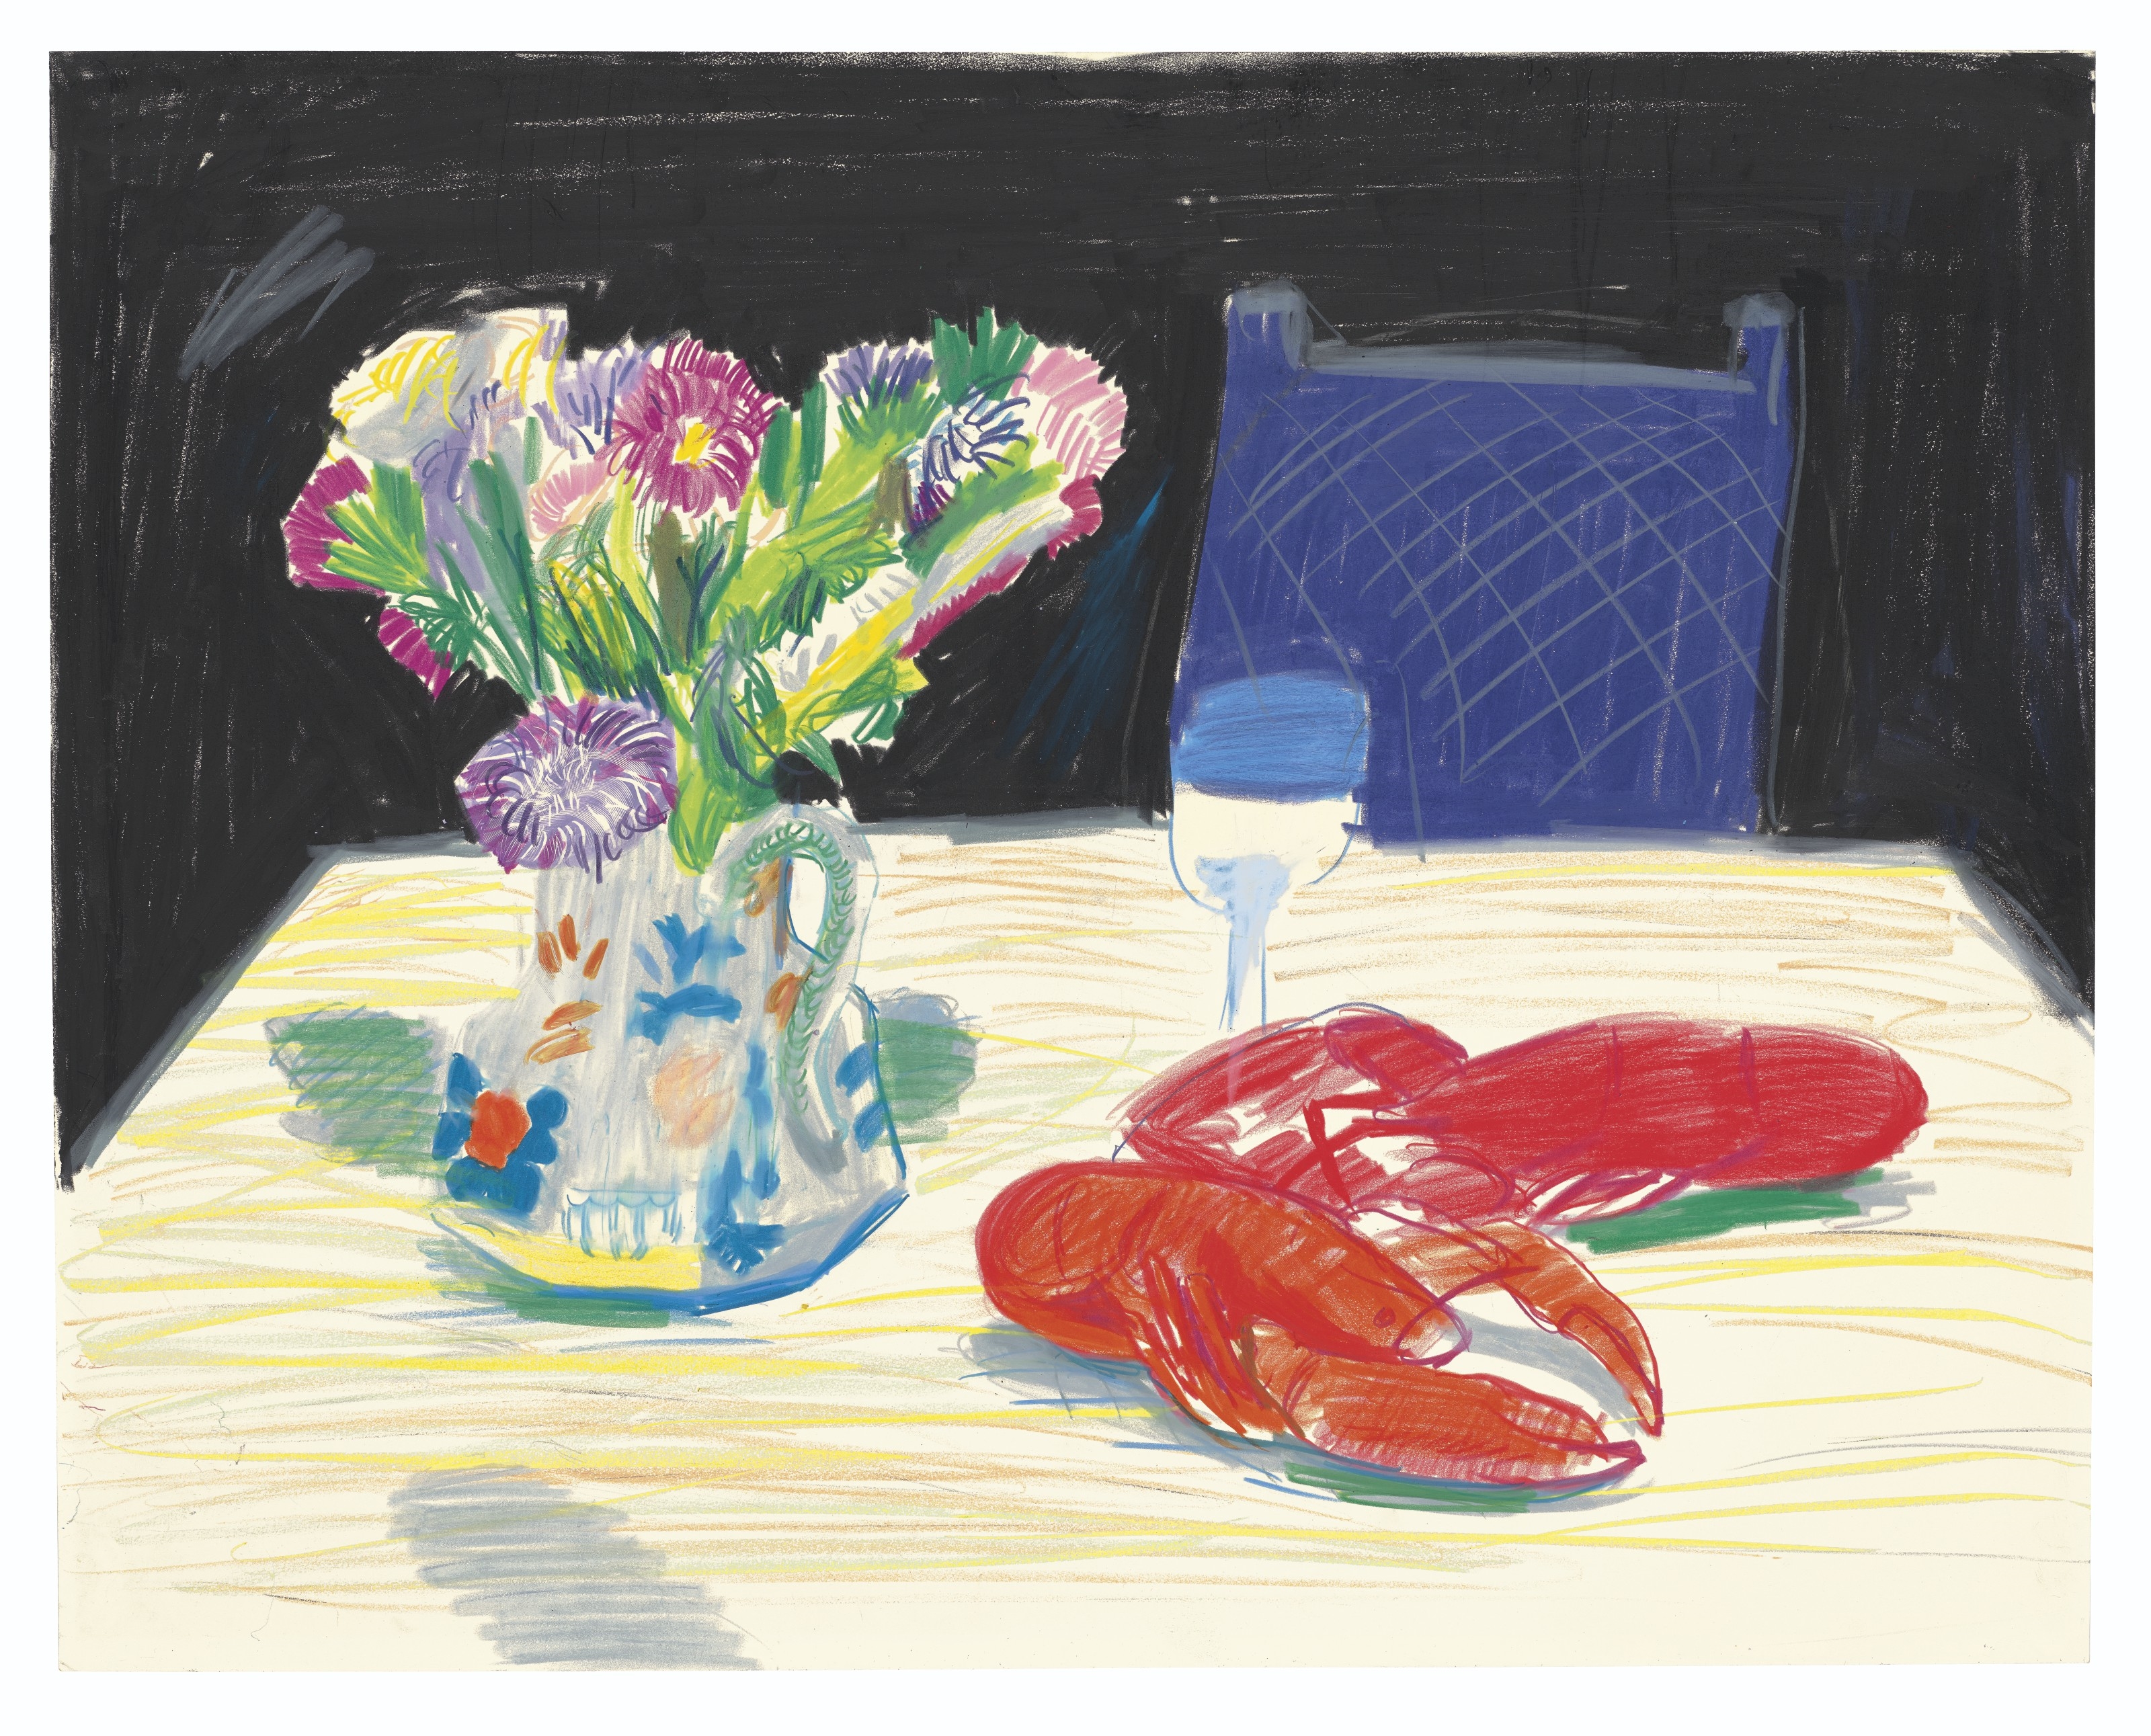 Still Life with Flowers and Lobster at Odin's Restaurant by David Hockney, Executed circa 1980